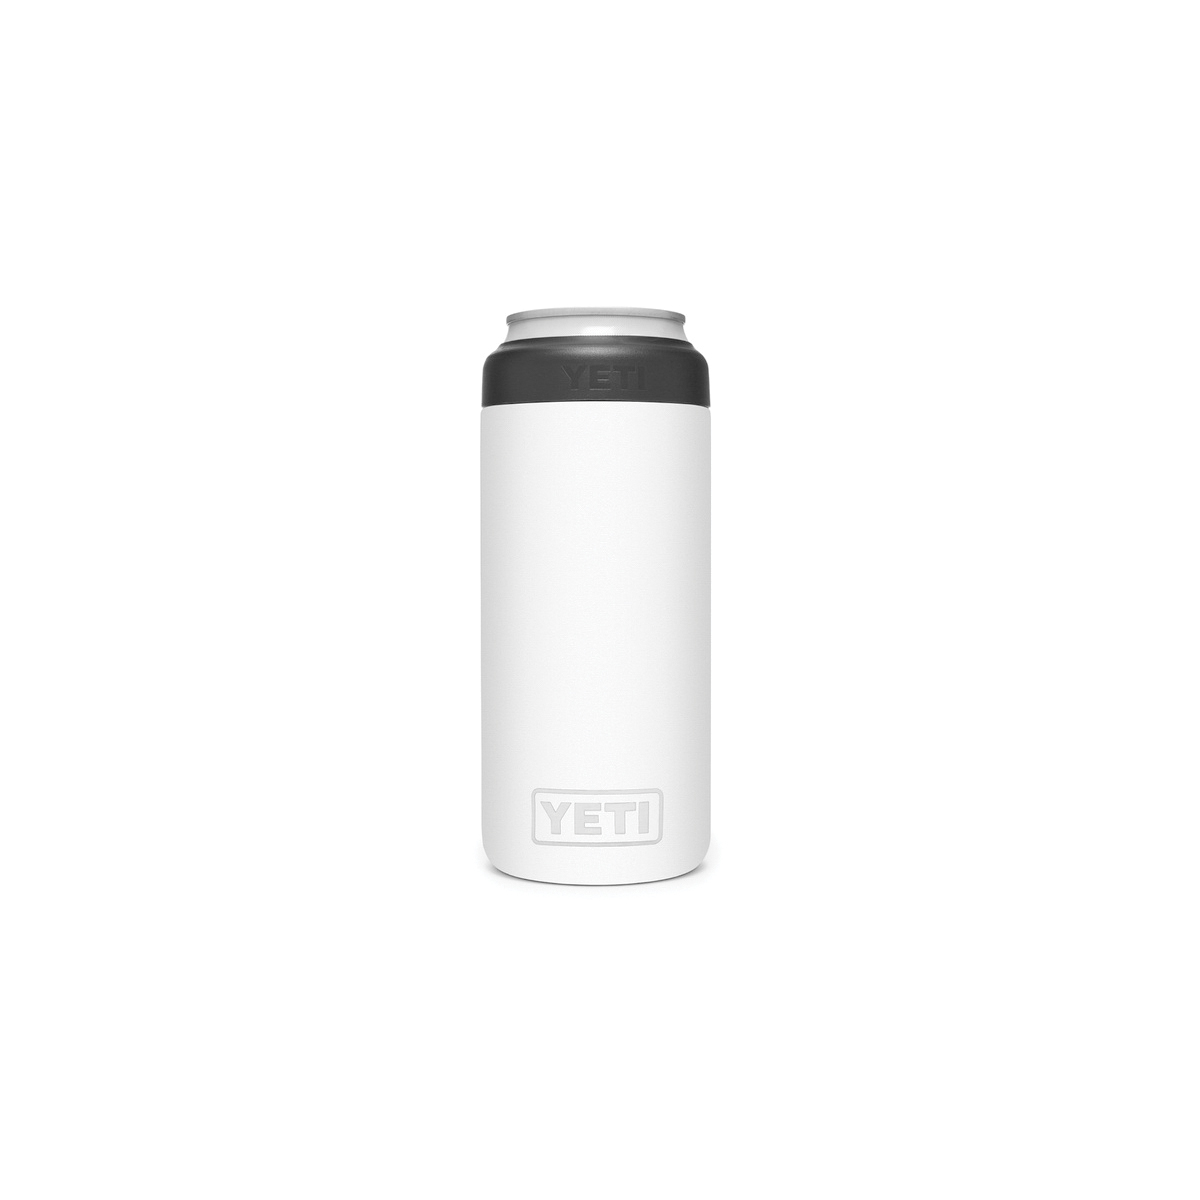 YETI Rambler 21070090082 Colster Can Insulator, 2-3/4 in Dia x 6-1/8 in H, 12 oz Can/Bottle, Stainless Steel, White - 1